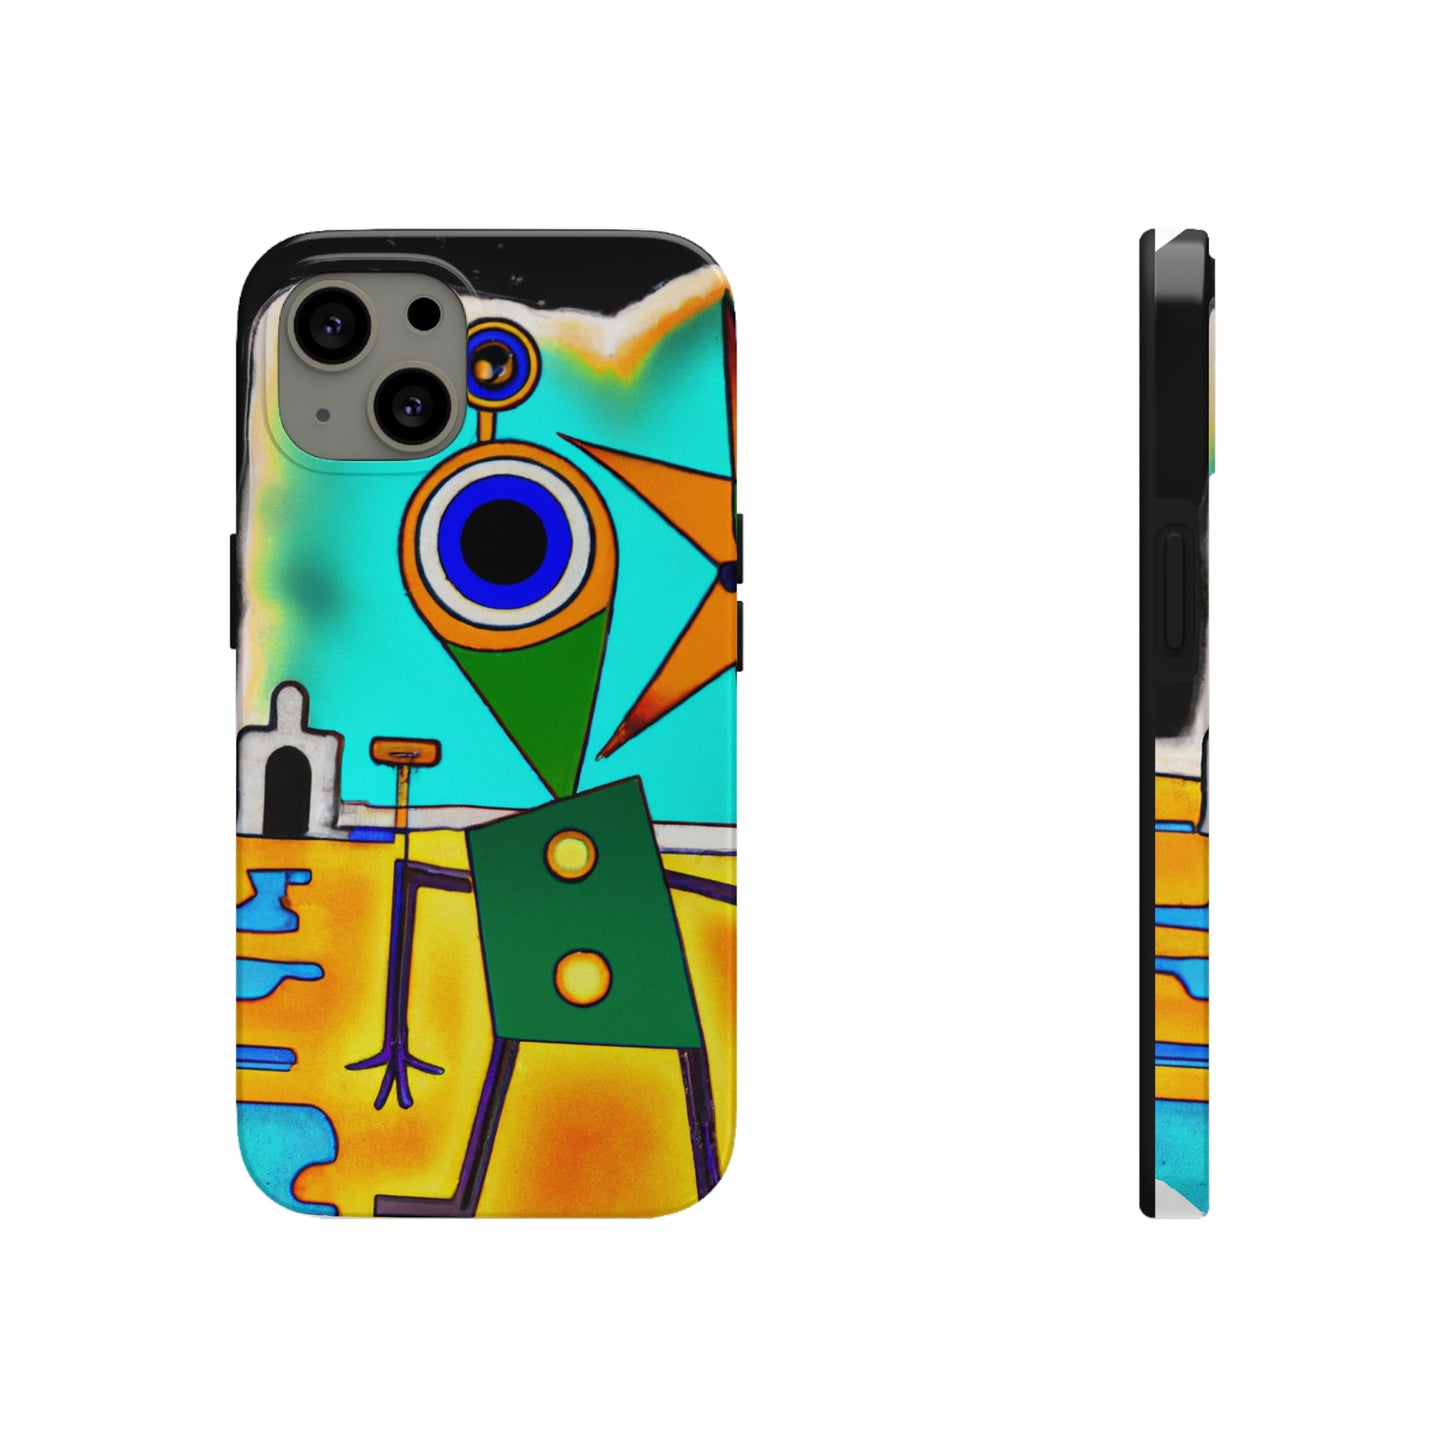 The Forgotten Earth: A Robot's Journey - The Alien Tough Phone Cases